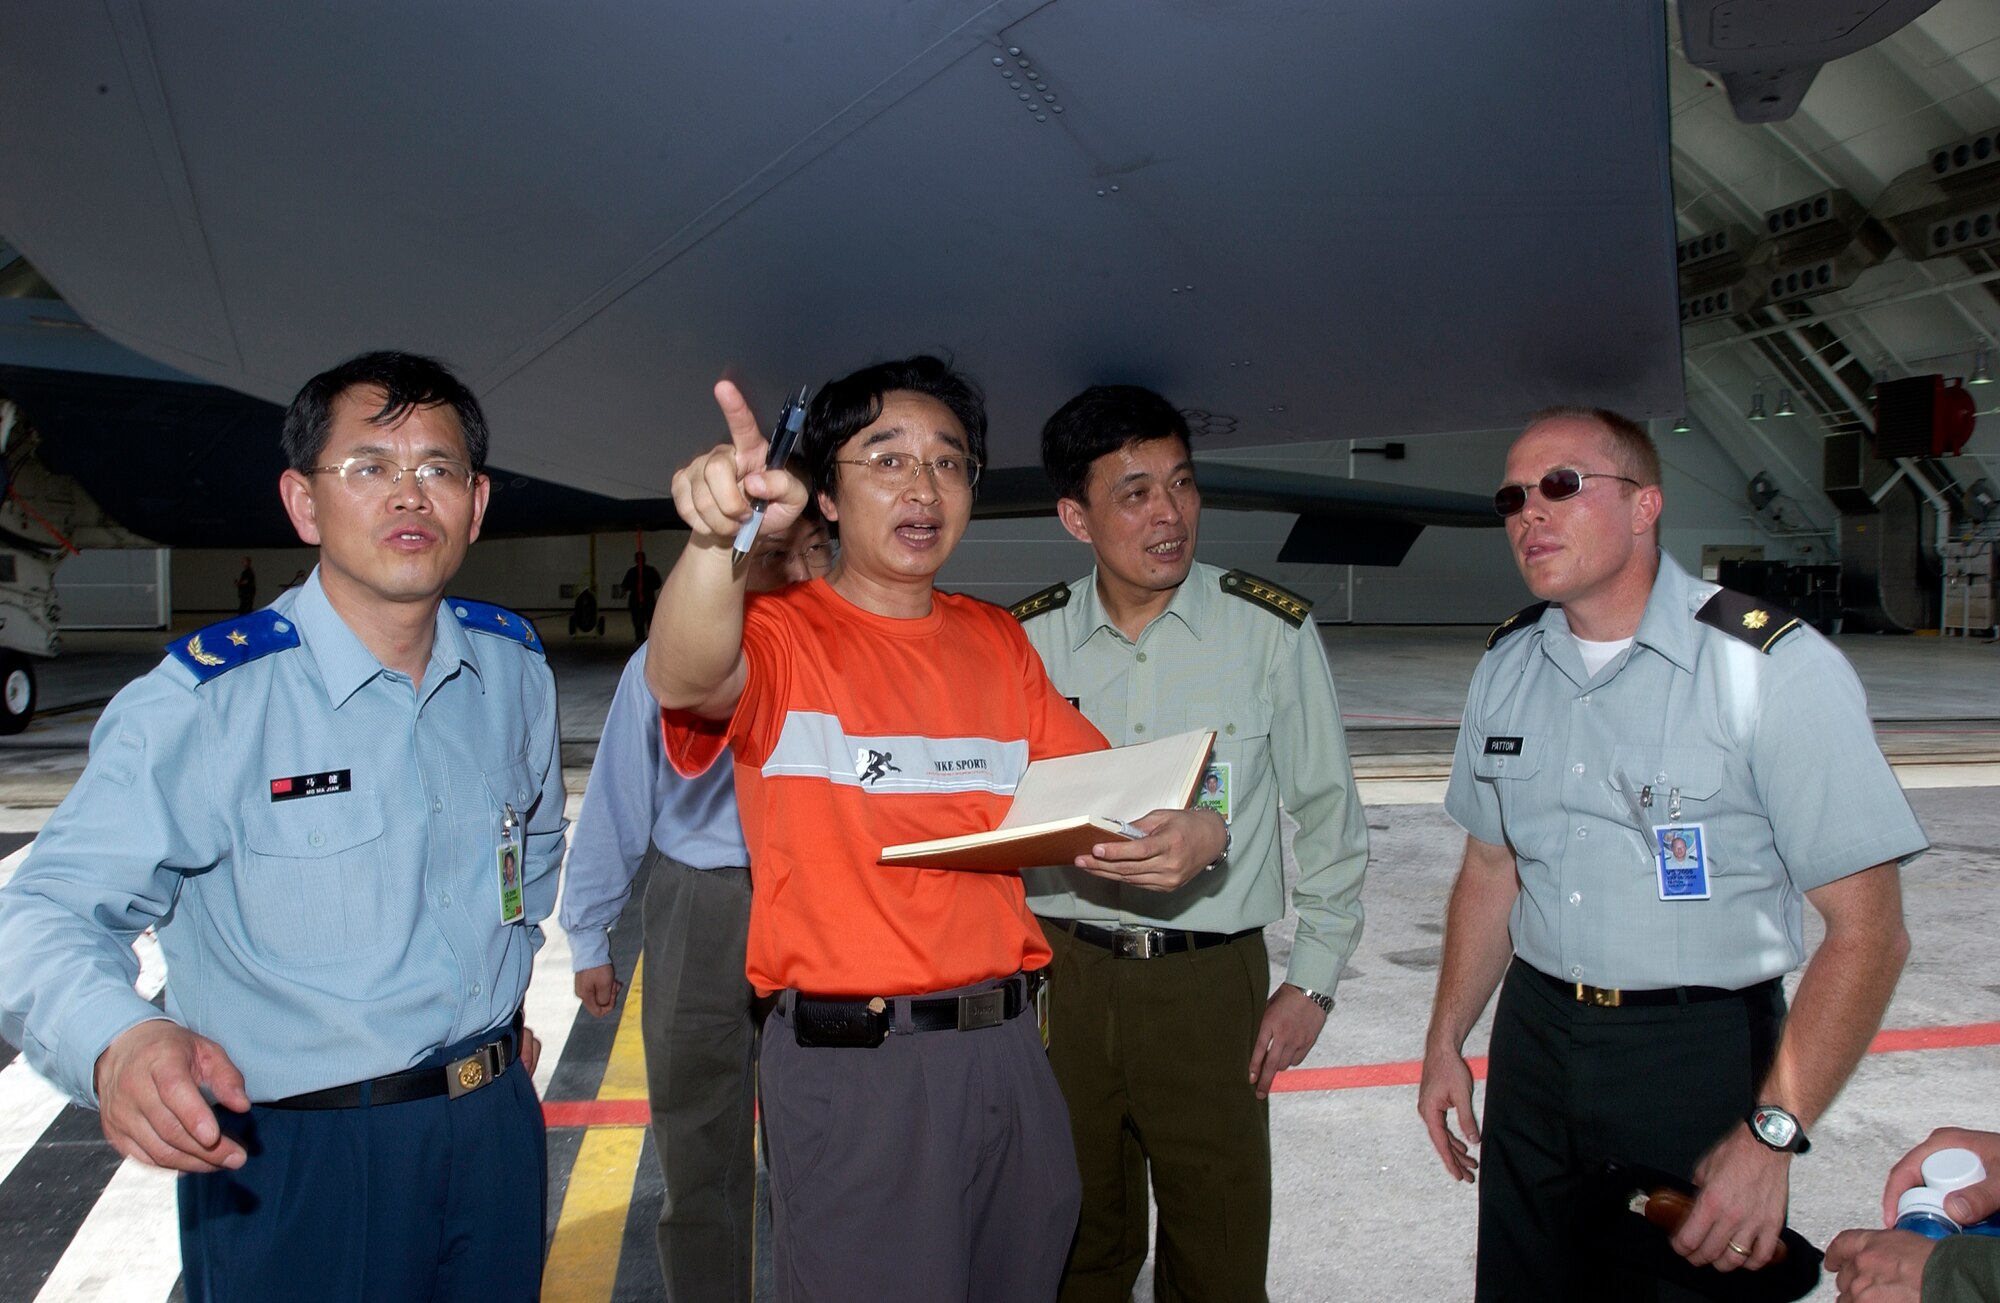 ANDERSEN AIR FORCE BASE, Guam -- Reporters and members of the Chinese foreign observer team ask questions about the F-15, during Valiant Shield '06, from an American representative. Foriegn observers were present from China, Russia, India, Australia, the Republic of Korea, Singapore, and Japan. Valiant Shield begins June 19 and lasts through June 23, and will be conducted in the vicinity of Guam. Valiant Shield focuses on integrated joint training among US military forces. (U.S. Air Force photo by Airman First Class Michael S. Dorus)